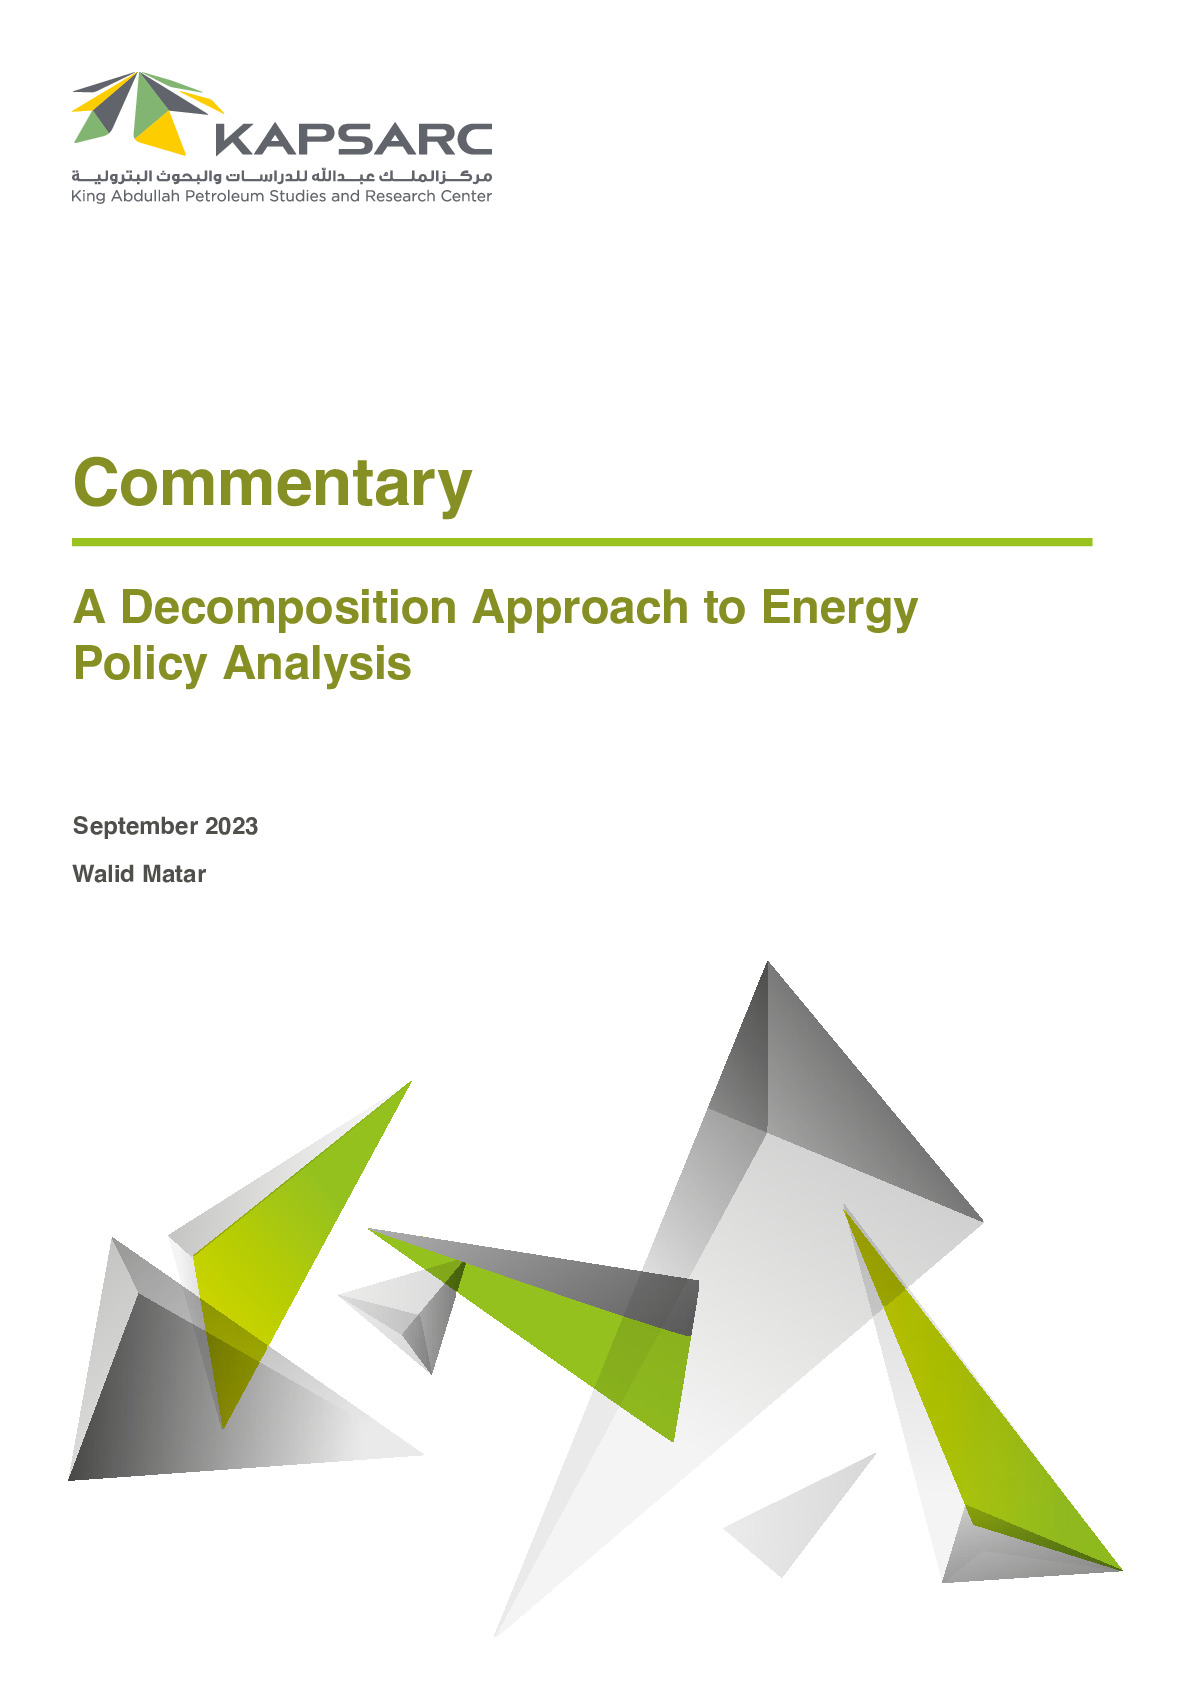 A Decomposition Approach to Energy Policy Analysis